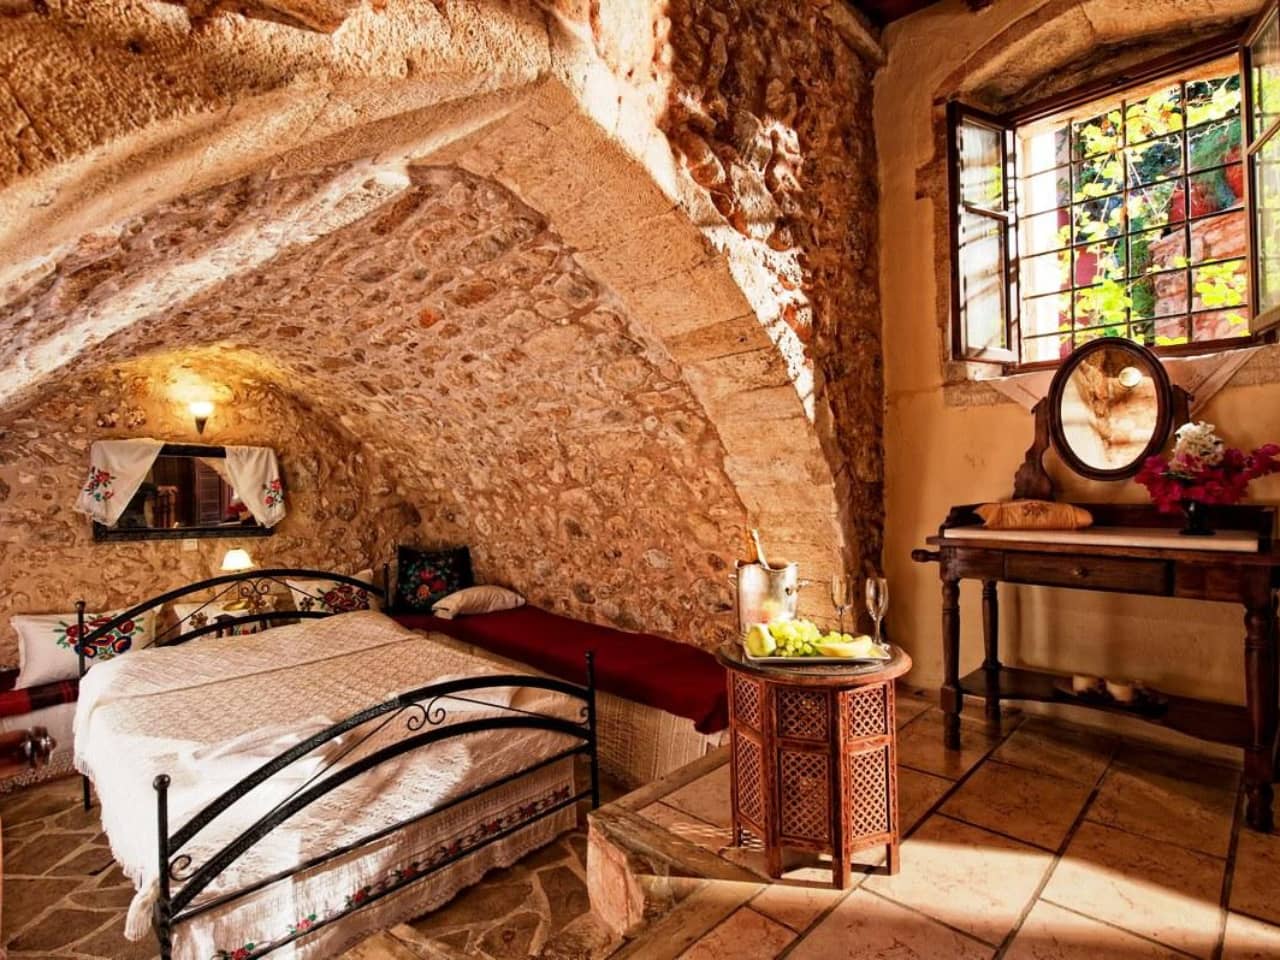 When a Venetian merchant invites you to stay in his home - this could be it.